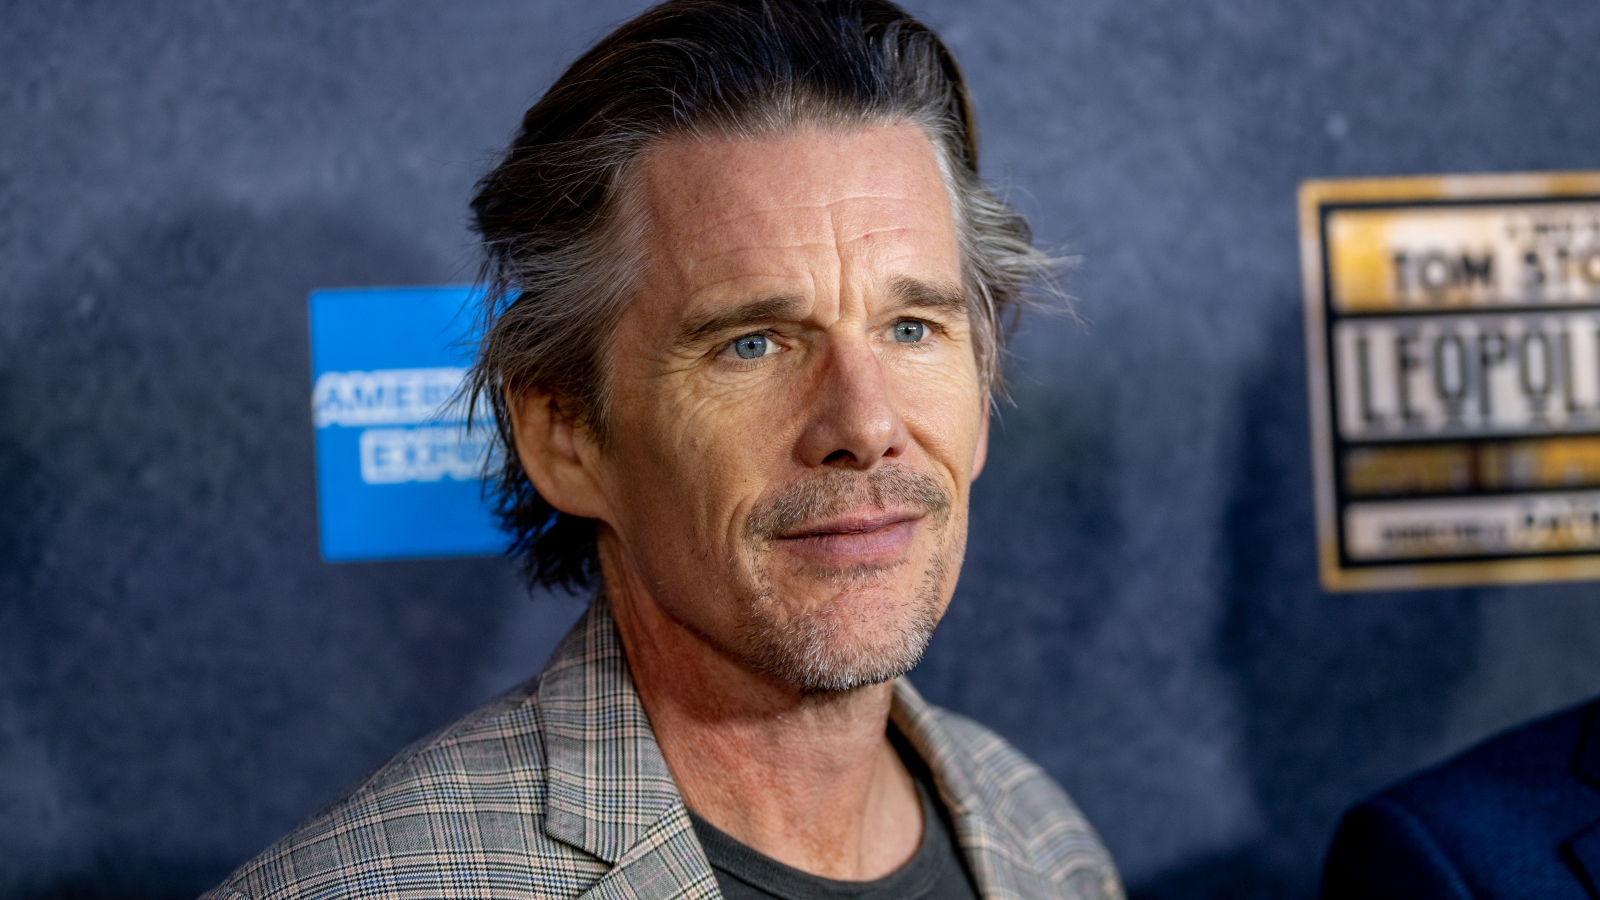 Ethan Hawke at the "Leopoldstadt" Broadway Opening Night